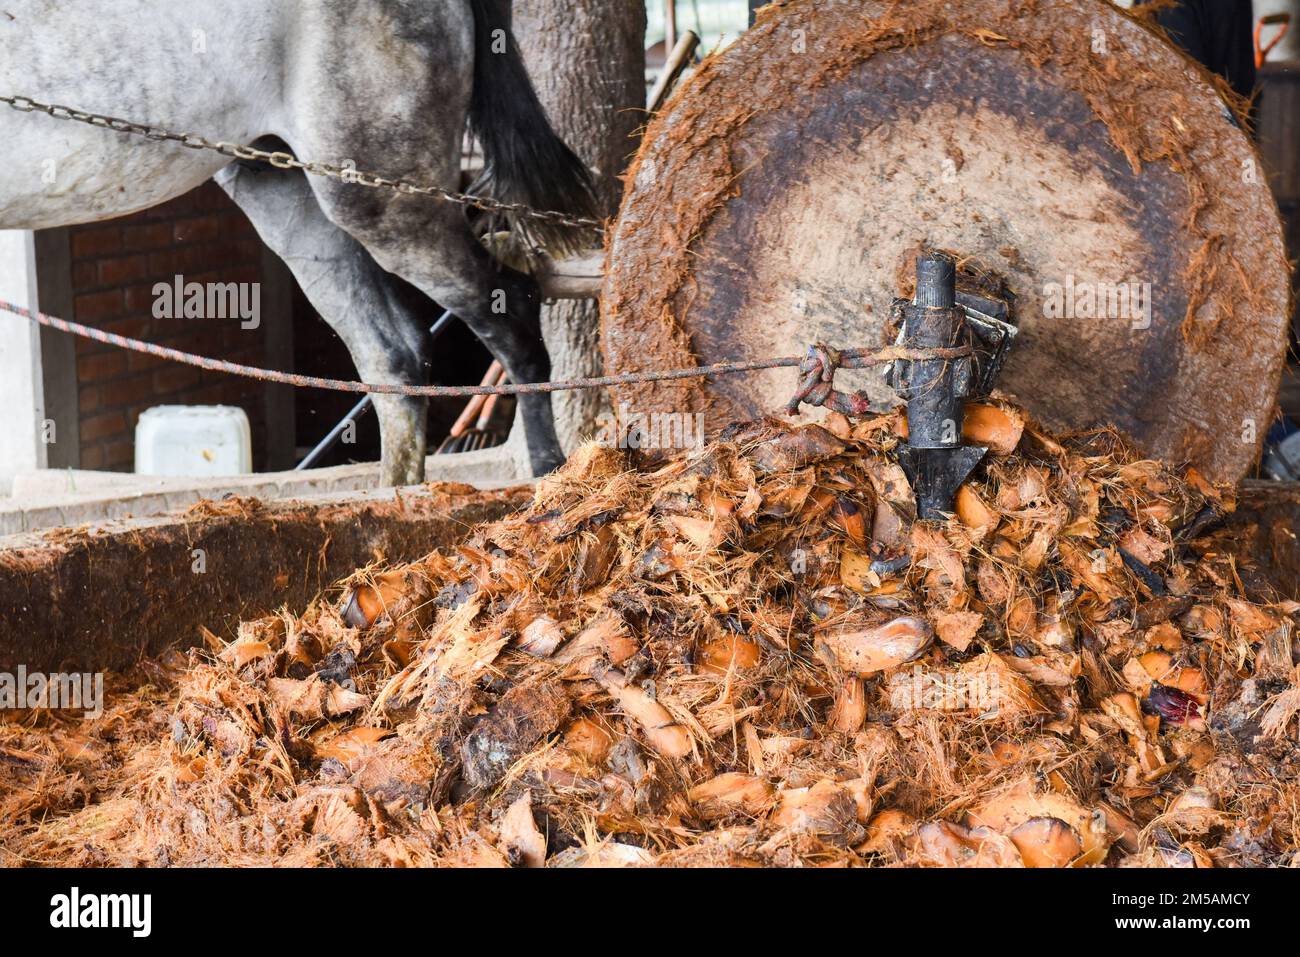 A horse pulls a giant stone wheel that crushes the roasted agave hearts at an artisanal mezcal distillery, Oaxaca State, Mexico Stock Photo